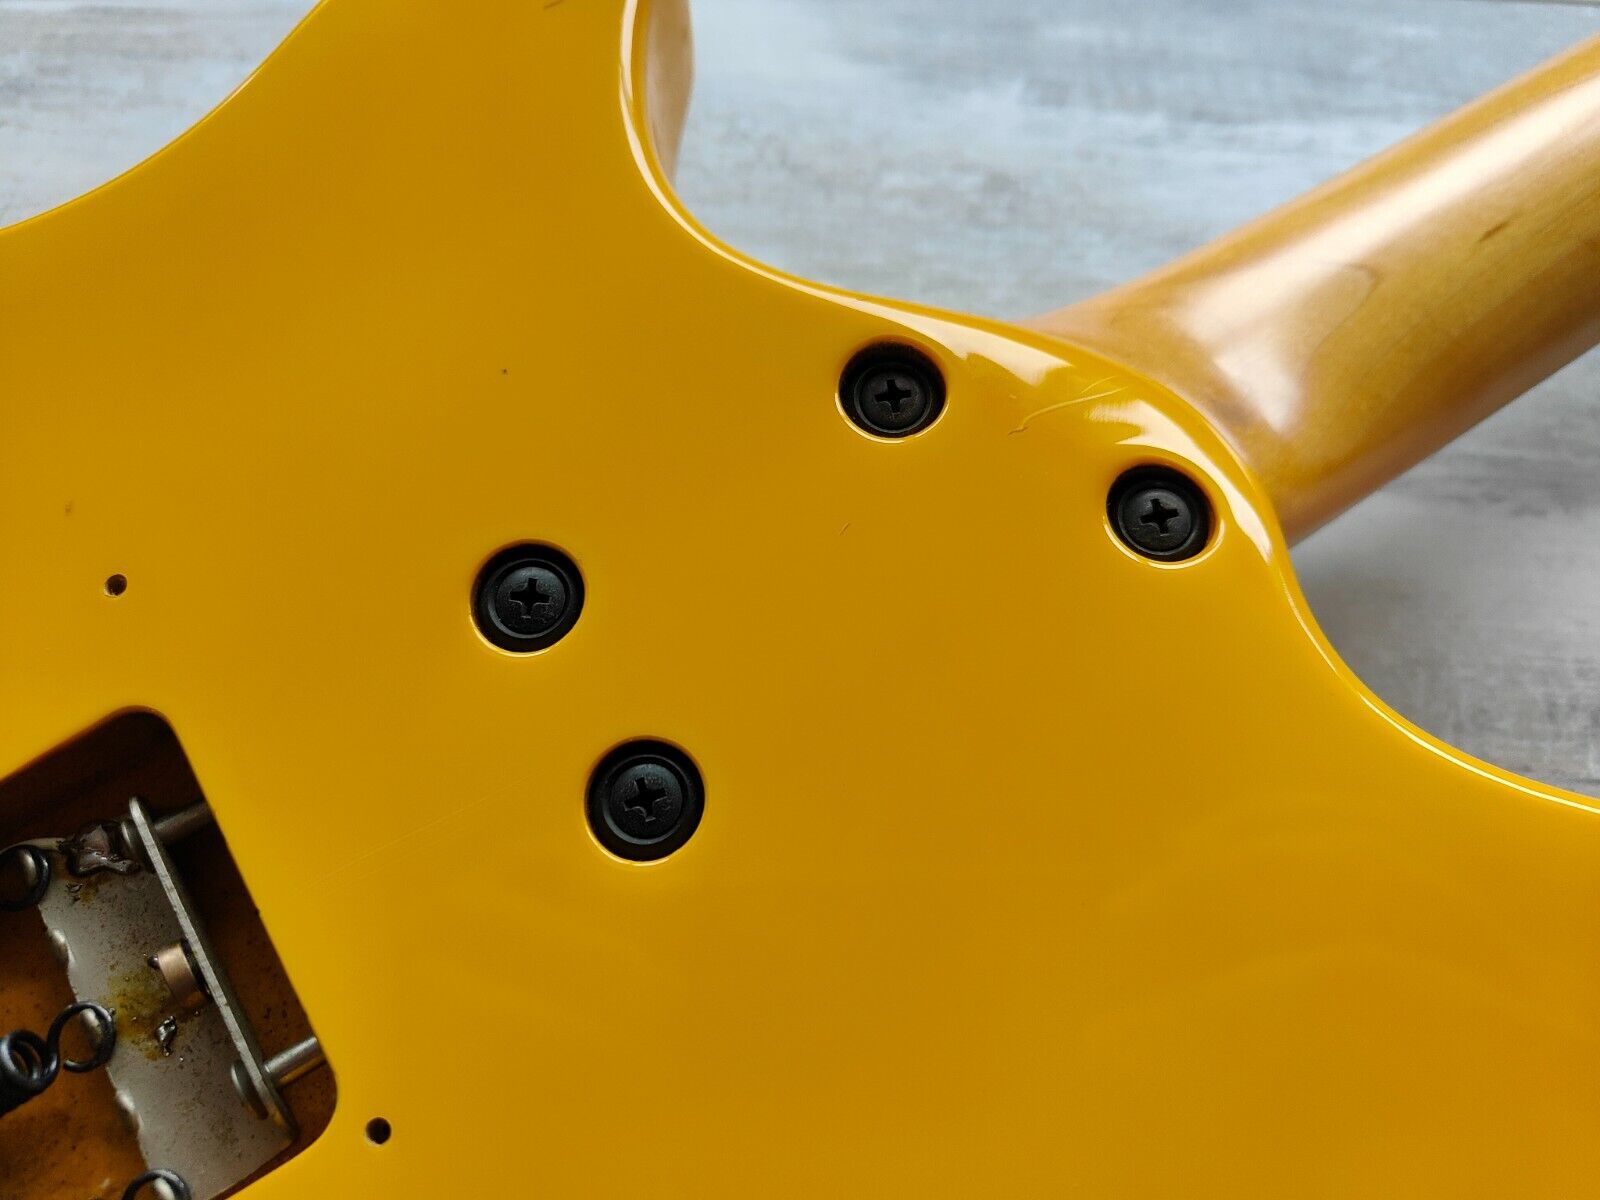 1990 Heartfield (by Fender Japan) RR-7 "Rock and Roll" (Yellow)